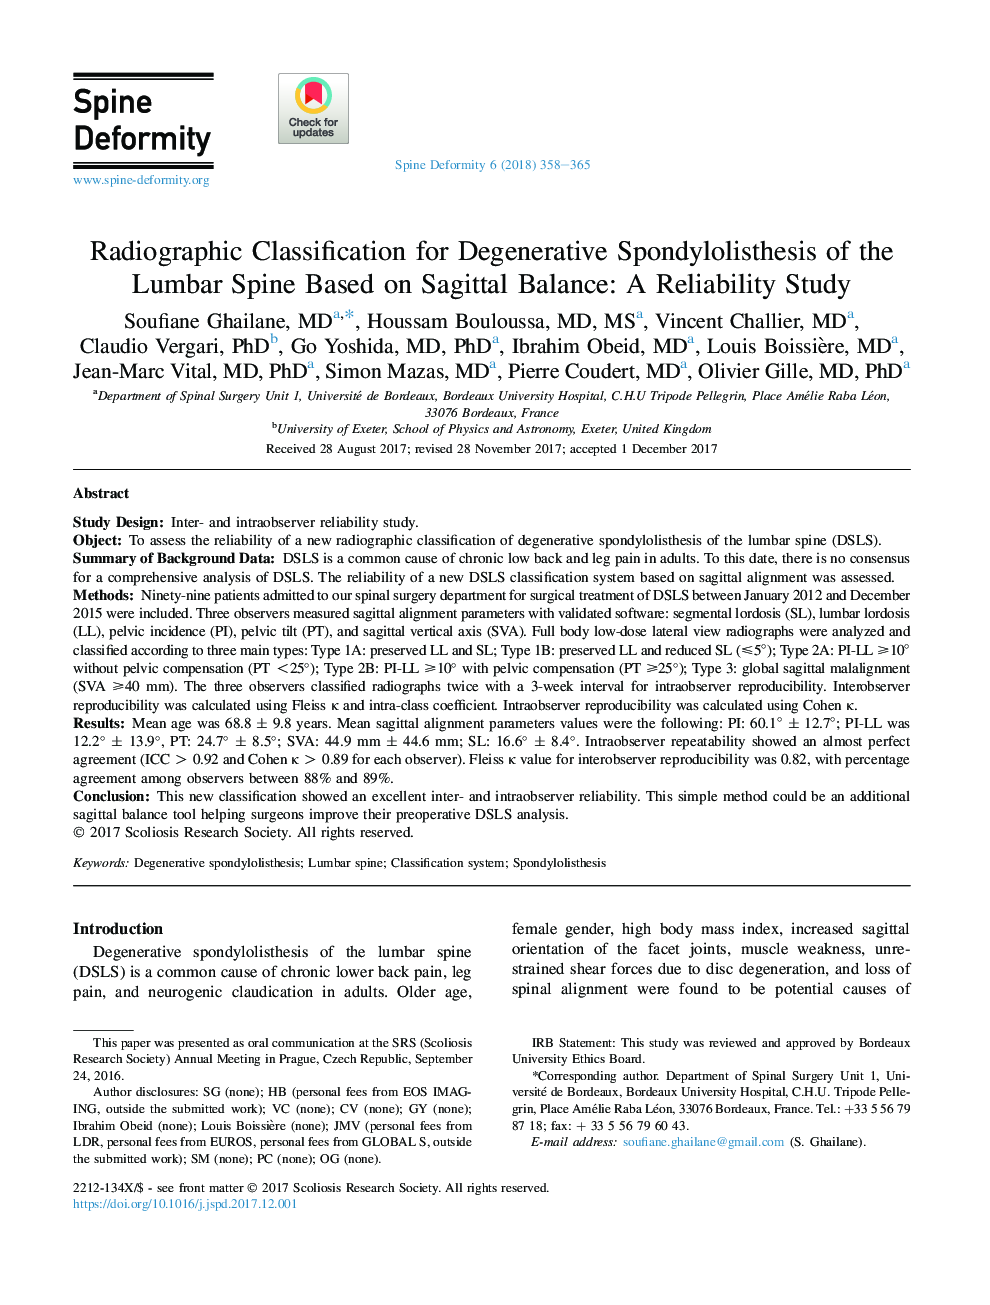 Radiographic Classification for Degenerative Spondylolisthesis of the Lumbar Spine Based on Sagittal Balance: A Reliability Study